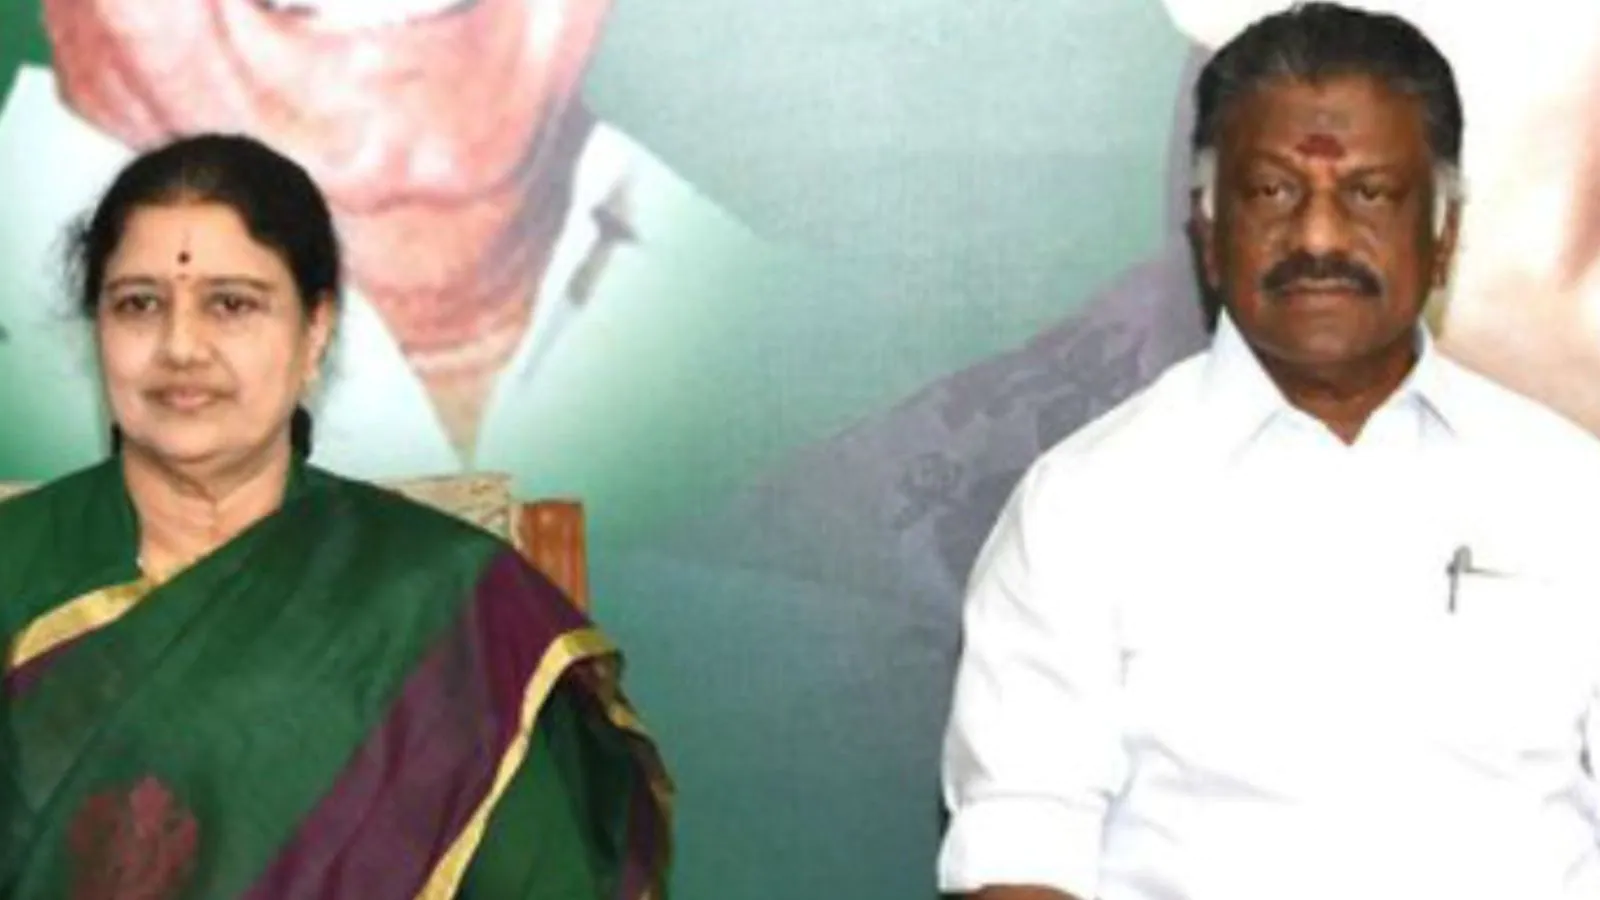 ADMK's Panneerselvam Extends Olive Branch to Expelled Leader Sasikala, Dhinakaran for ‘Party’s Sake’